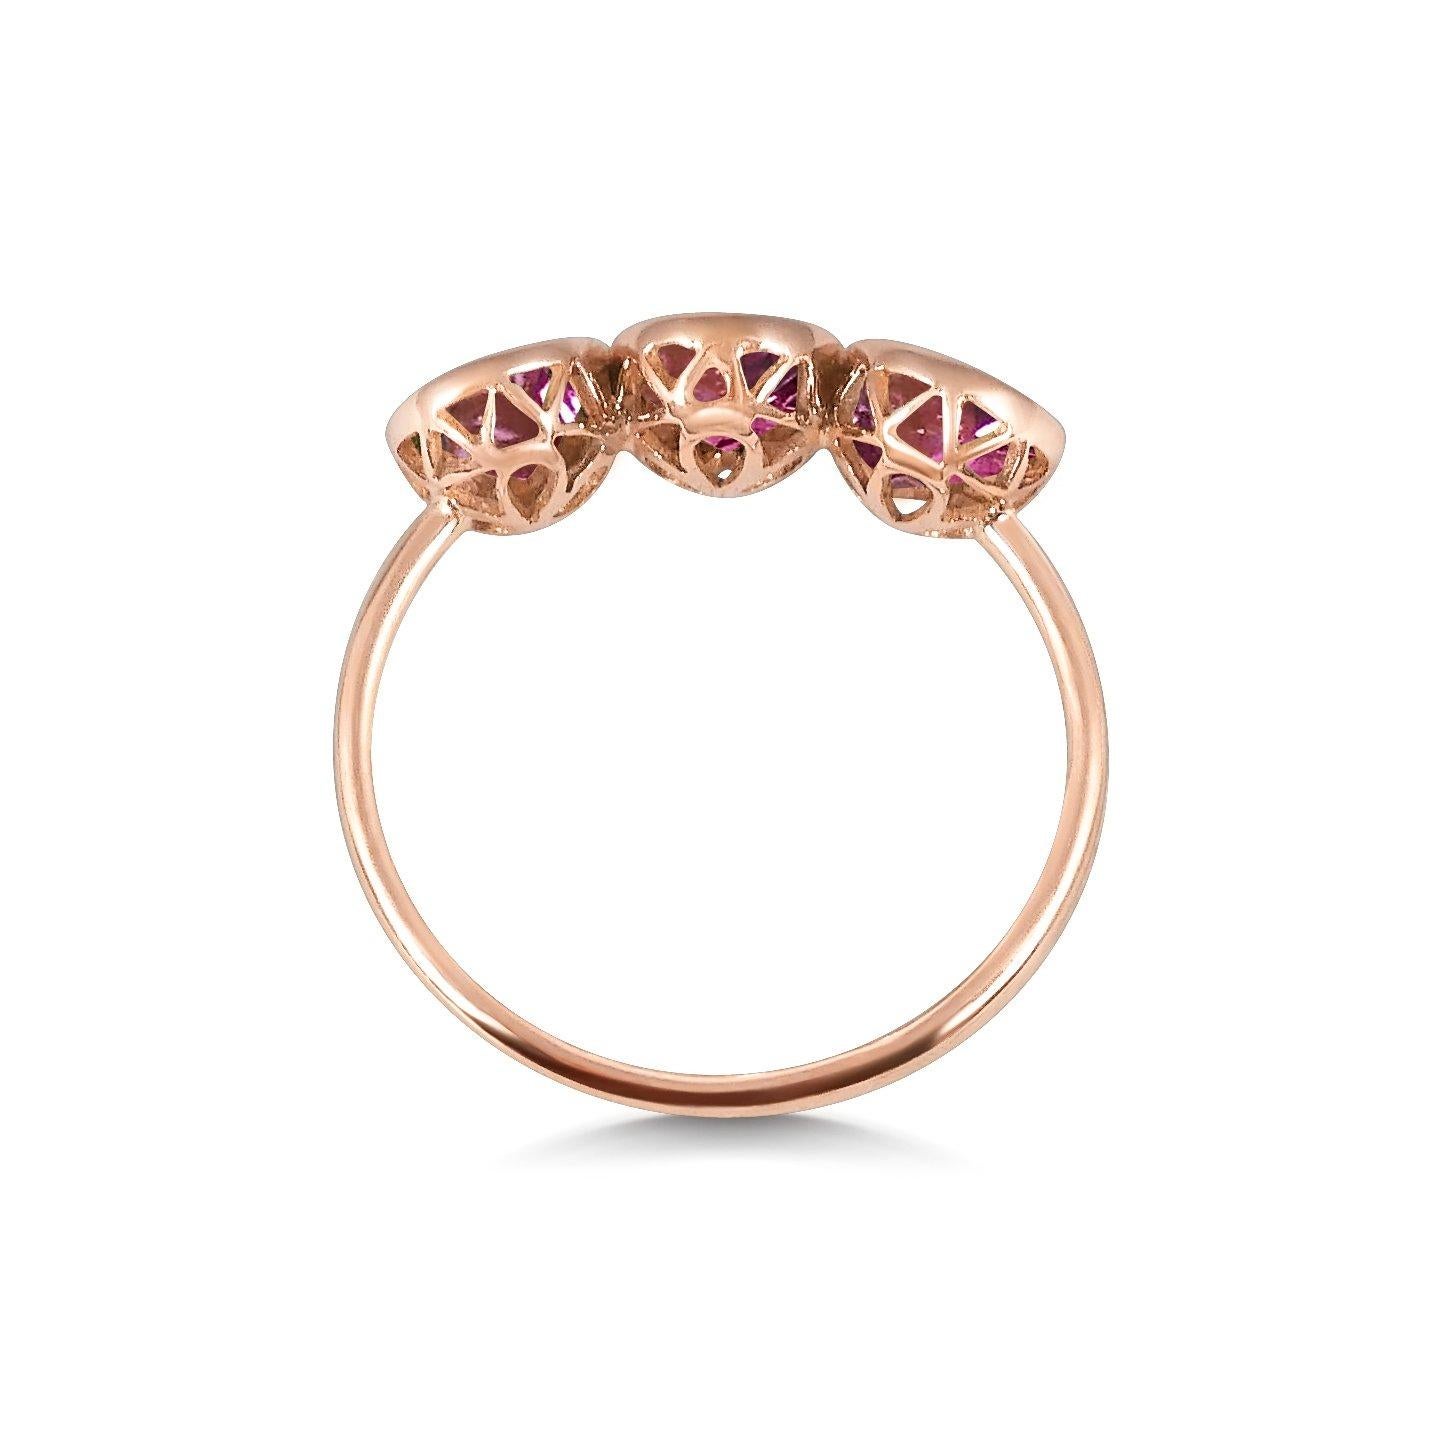 For Sale:  Handcrafted 1.50 Carats Pink Tourmalines 18 Karat Rose Gold Three-Stone Ring 2